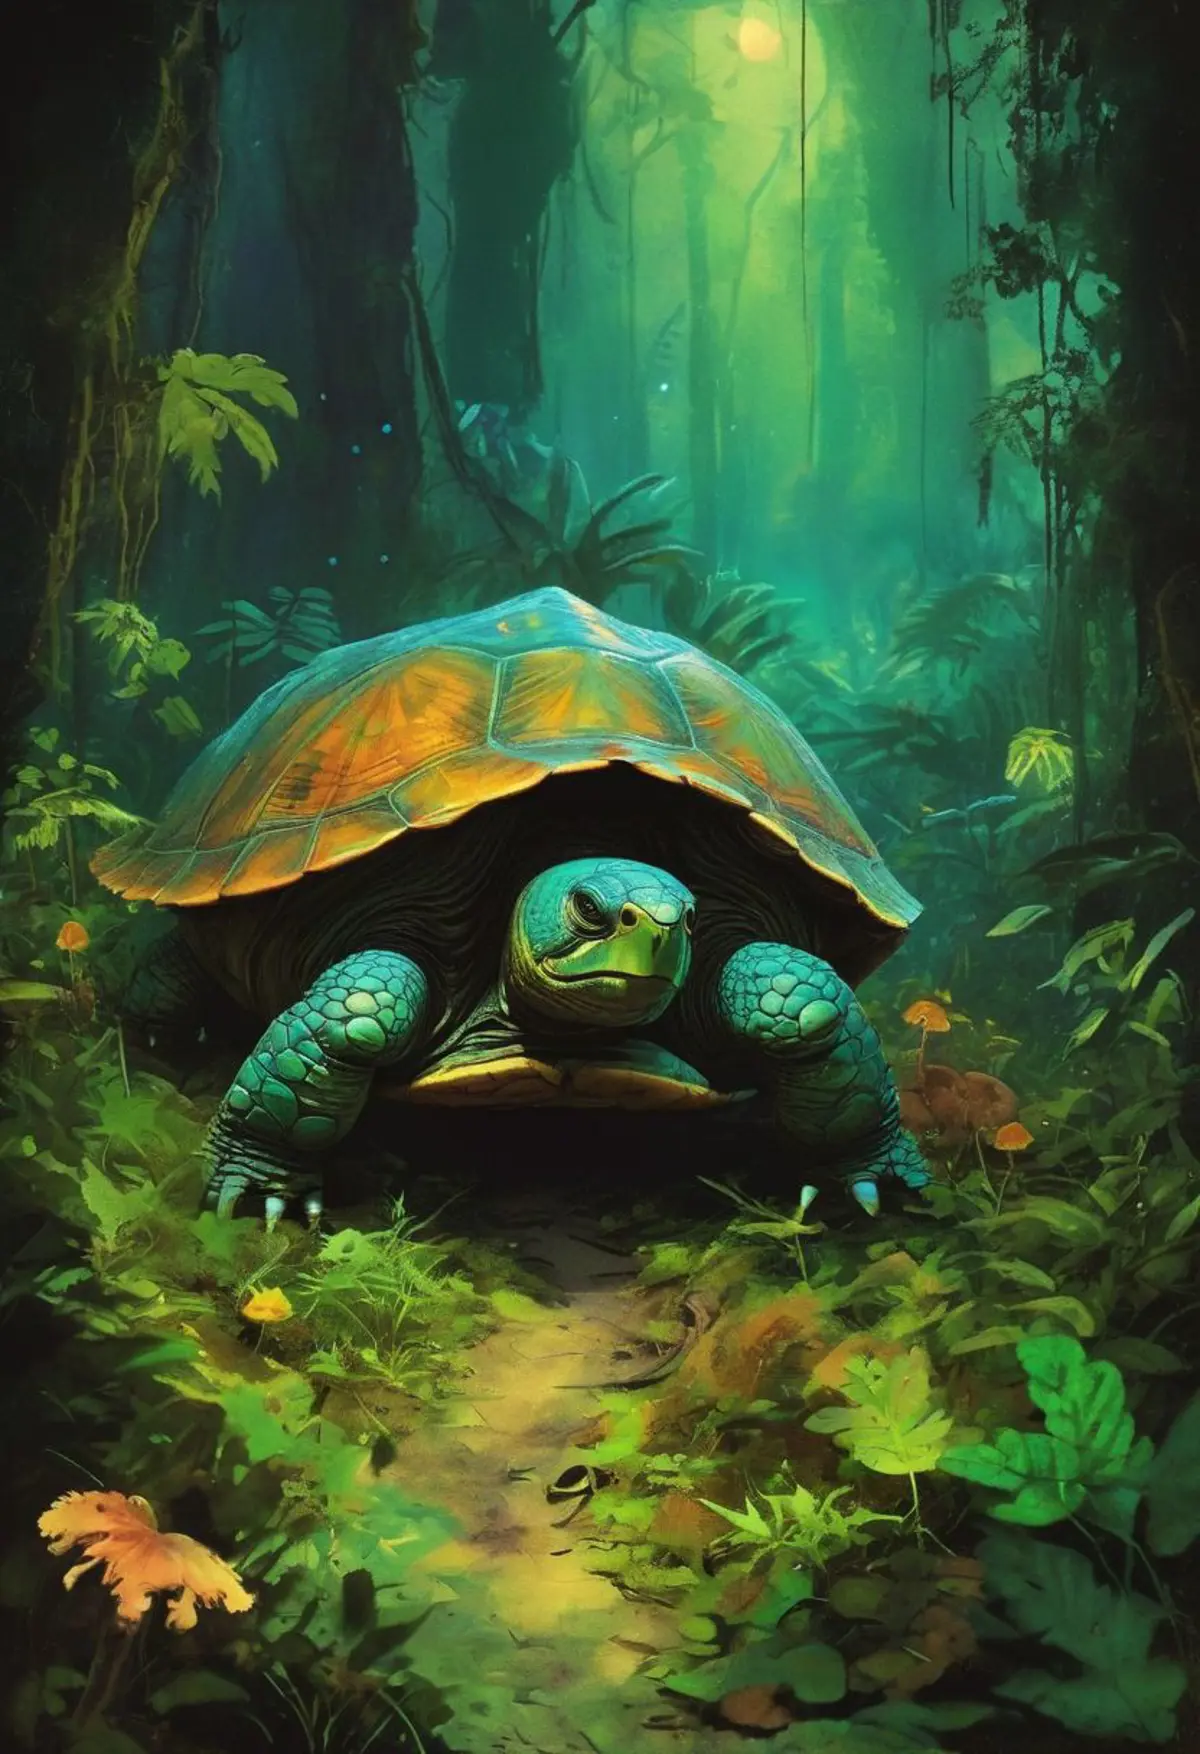 A large tortoise in the heart of a dense jungle. Green light filters through the canopy above onto the tortoise’s orange shell, providing a stark contrast against its dark blue-green skin. 